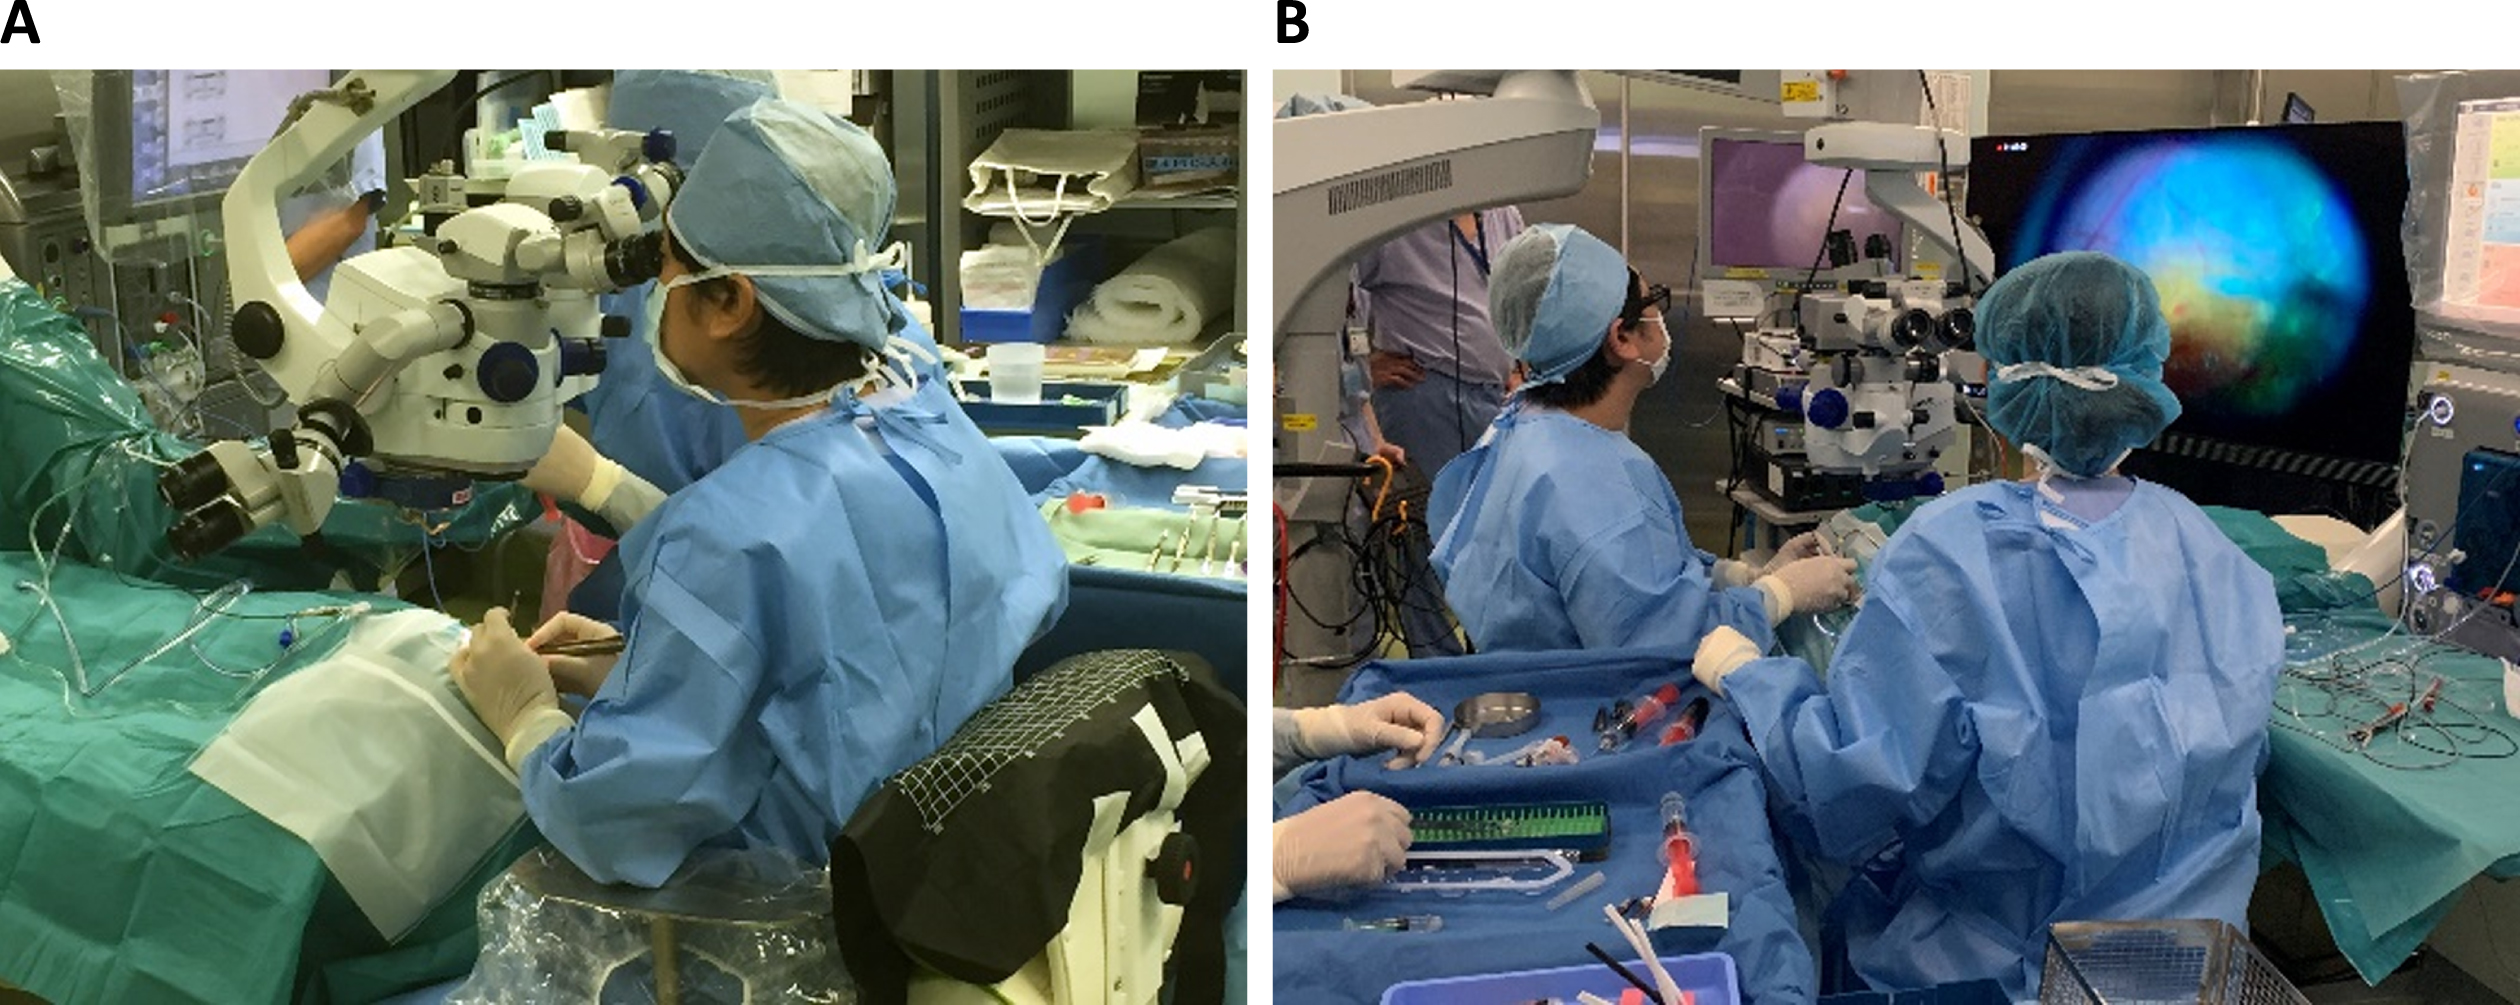 (A) Image showing surgery using the conventional ophthalmic microscope. (B) Image showing surgery performed through a heads-up display system.